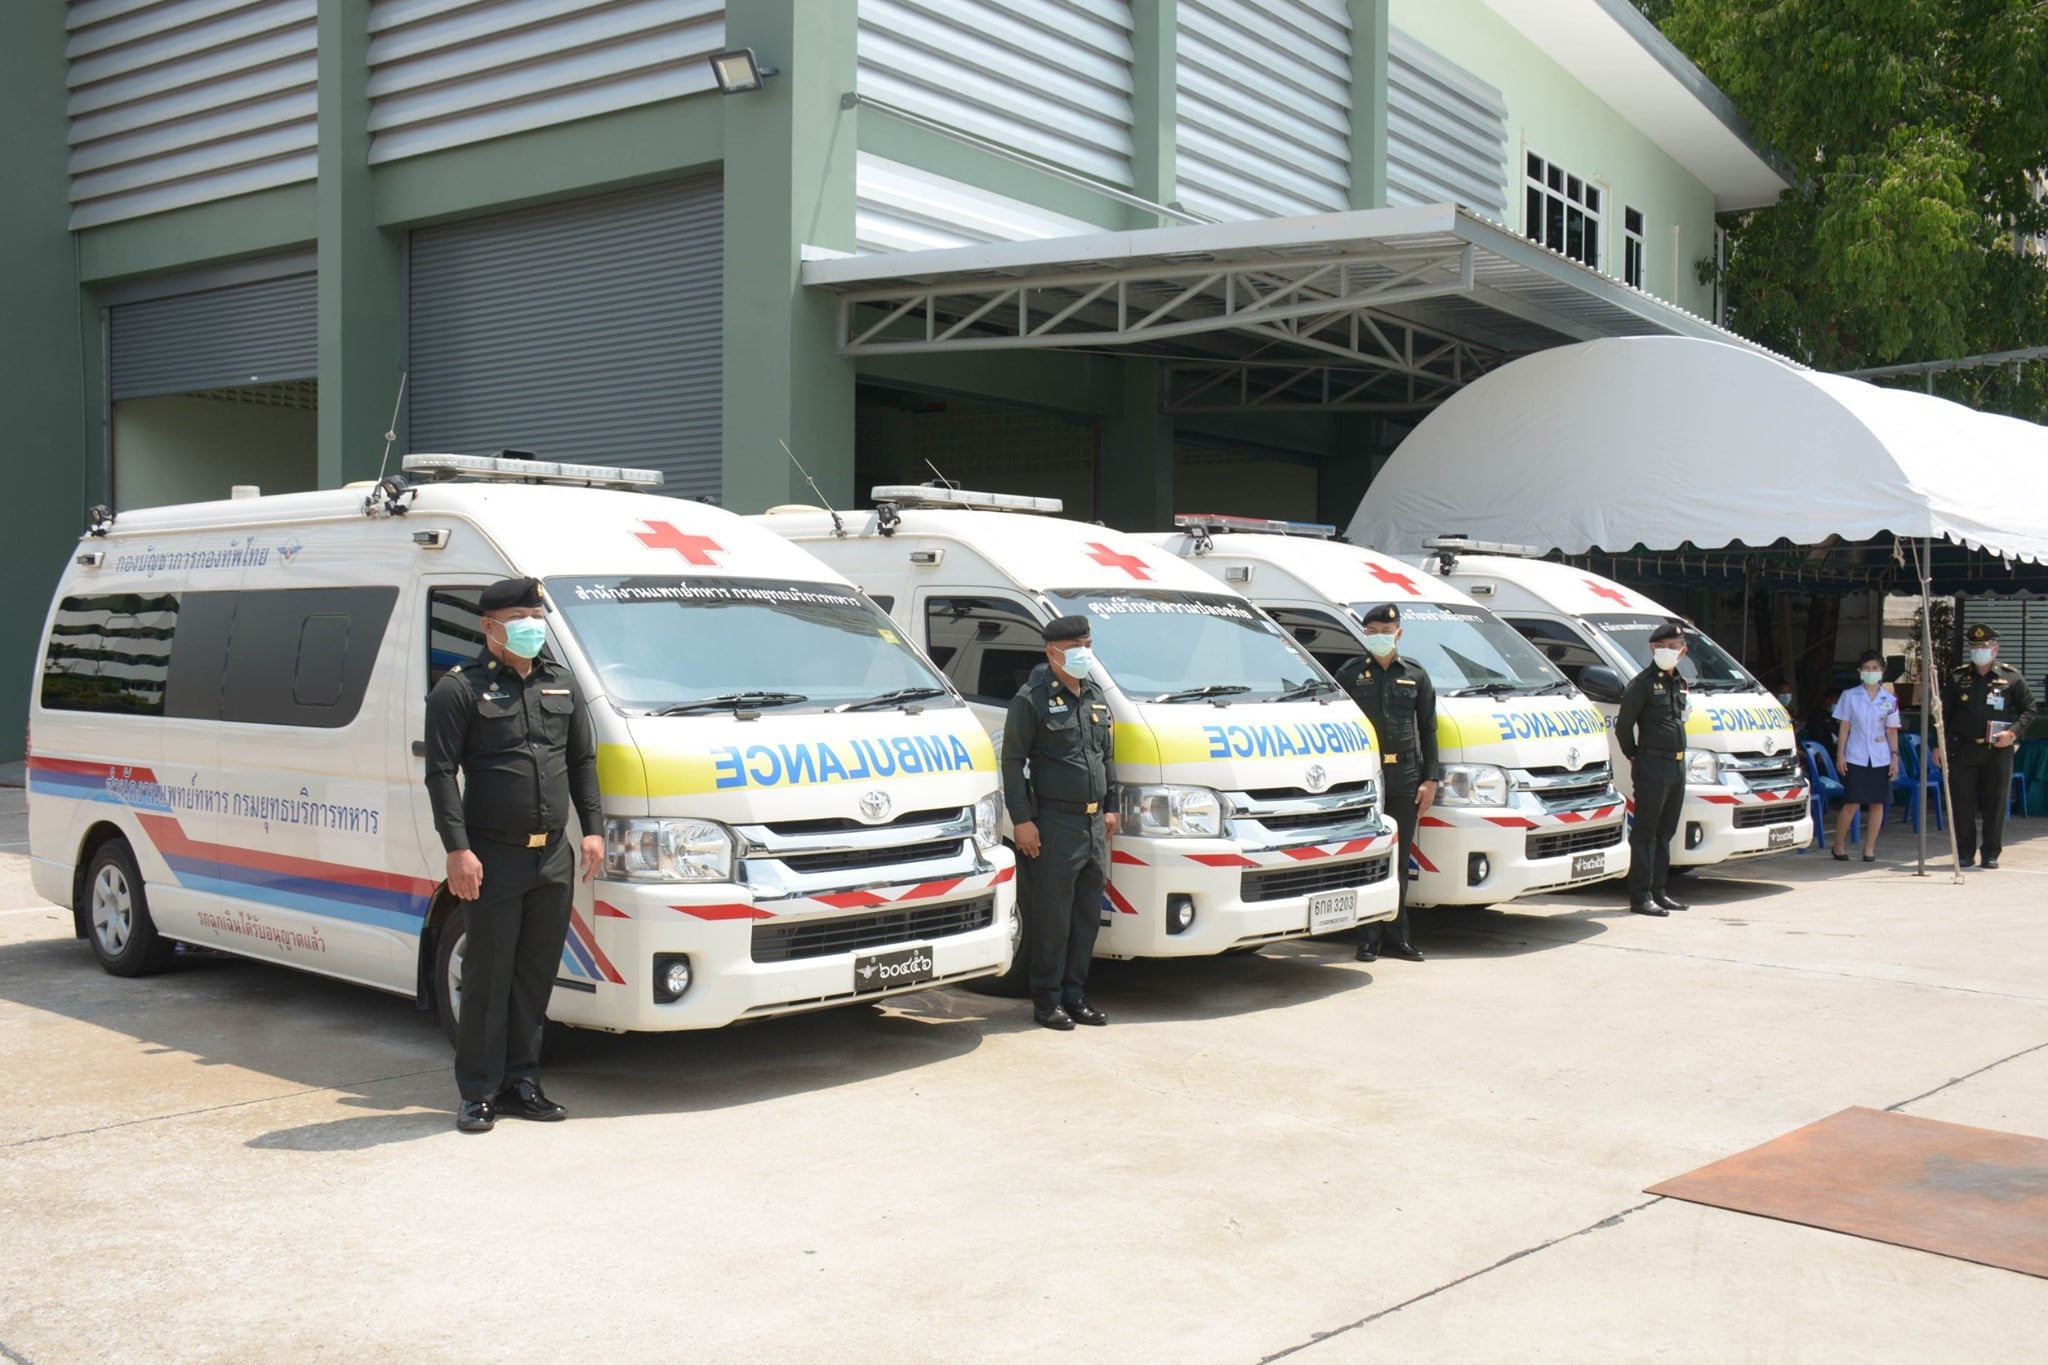 Royal Thai Police Ambulances in Thailand during the COVID-19 pandemic